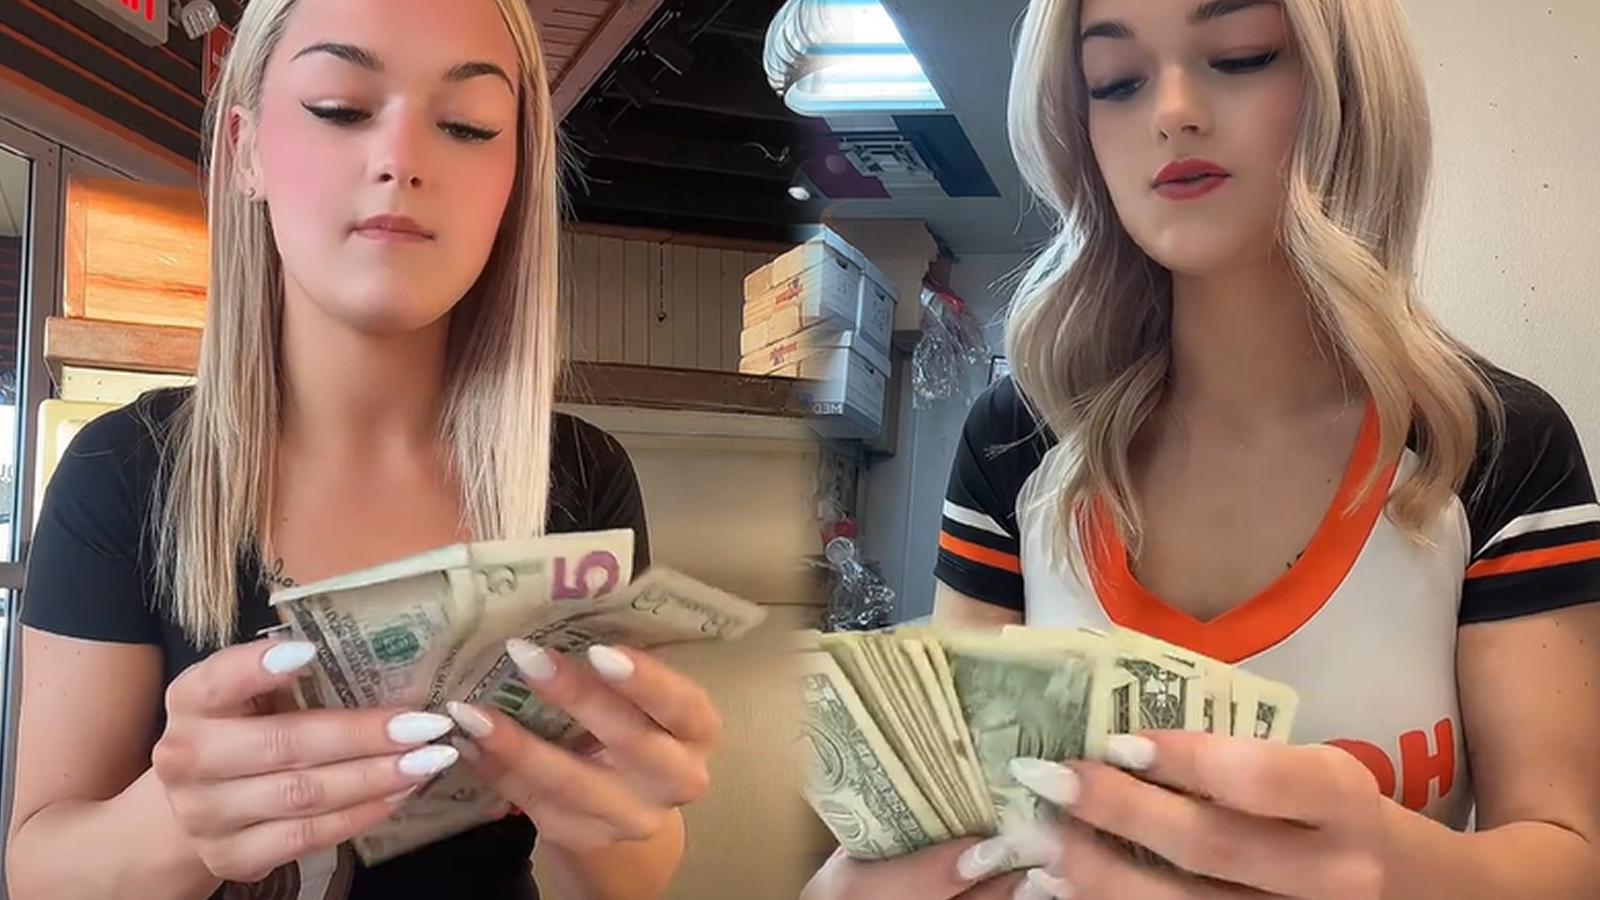 Hooters waitress stuns viewers after making 300 in tips during one shift